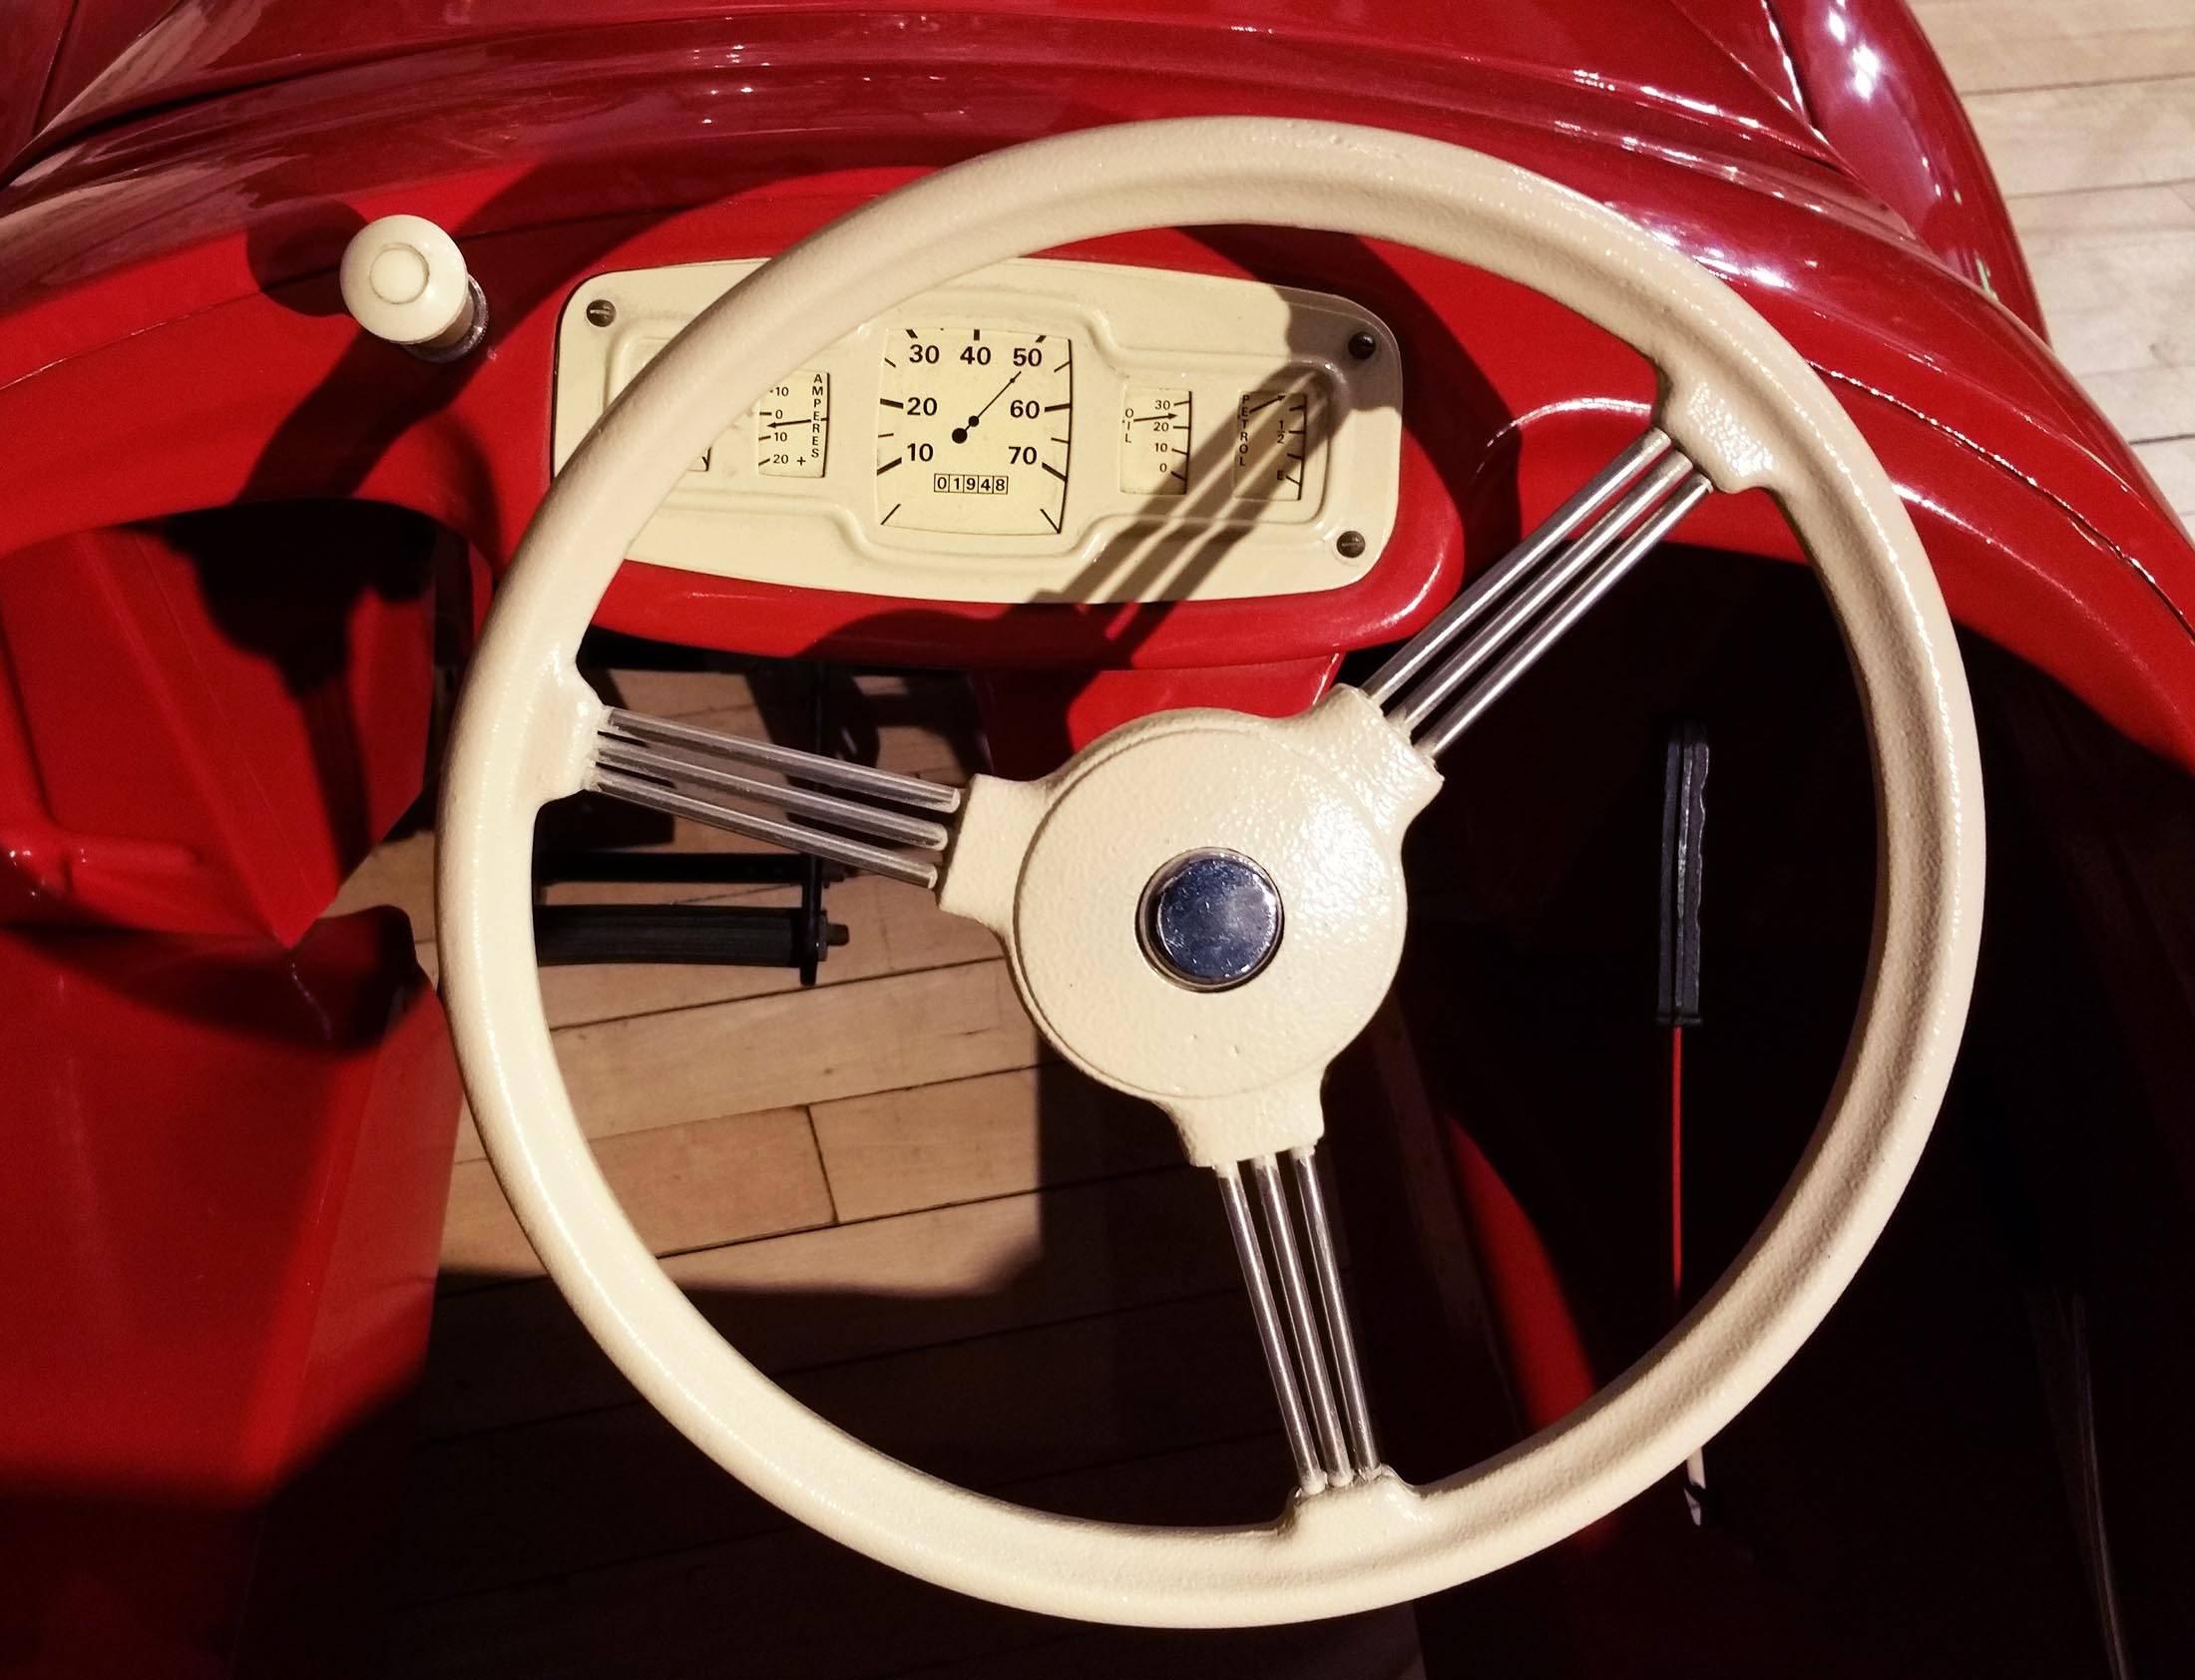 This superb and absolutely gorgeous child’s pedal car in the form of an Austin J40 is a numbered limited edition and restored in full working order. This child’s pedal car is a model of a Classic car, with working horn and lights and numerically